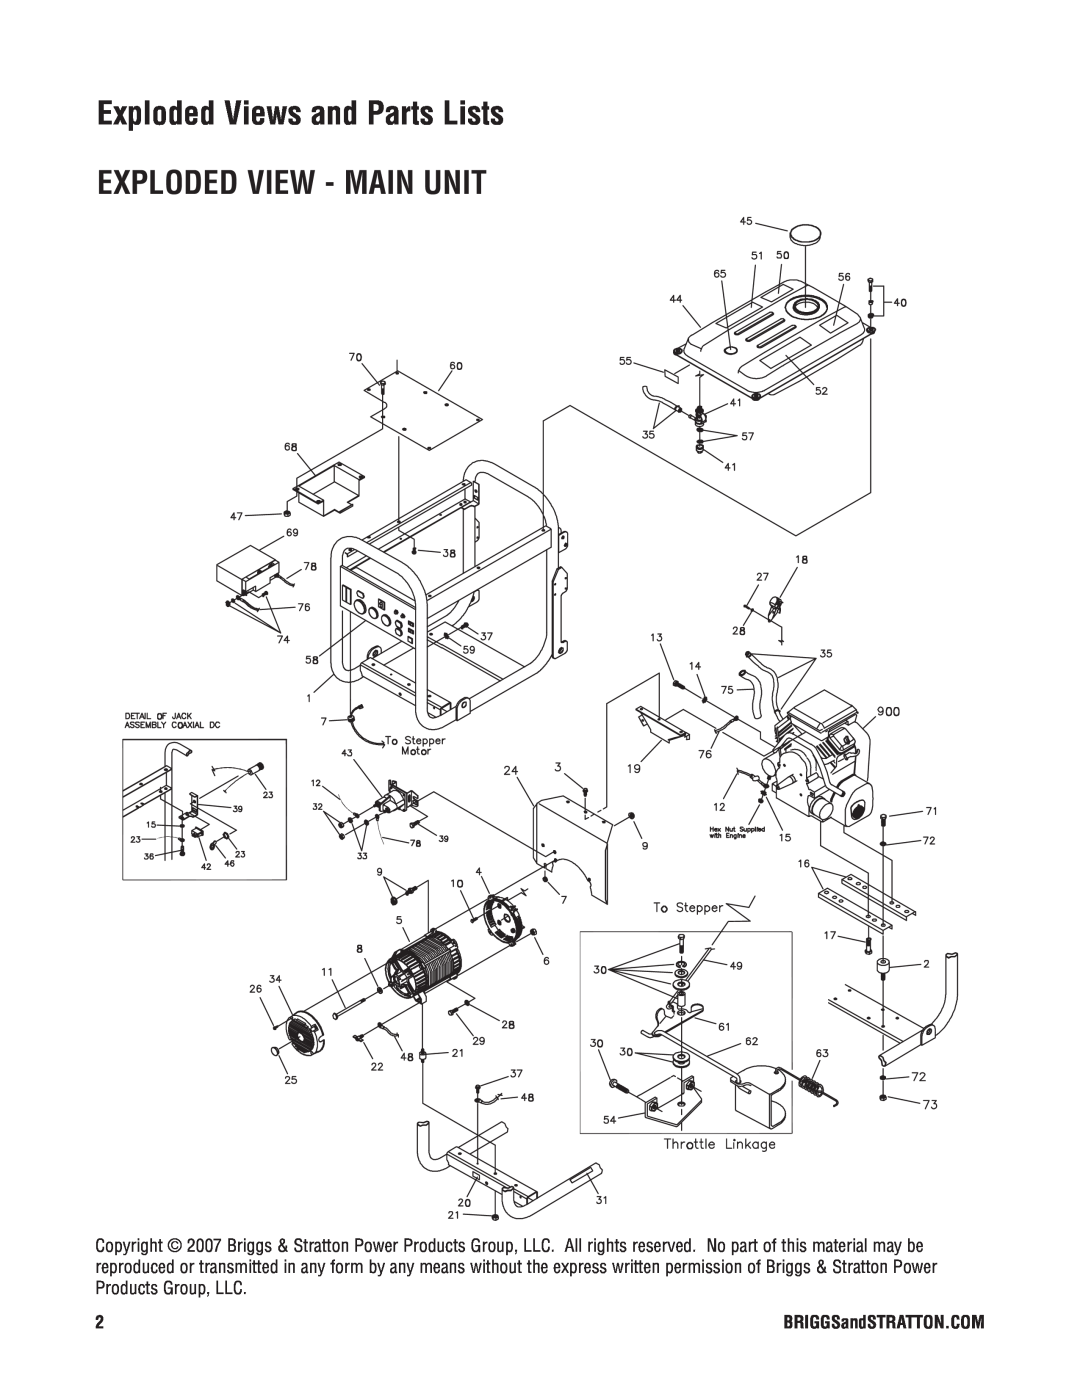 Briggs & Stratton PRO 10000 manual Exploded Views and Parts Lists, Exploded View - Main Unit, BRIGGSandSTRATTON.COM 